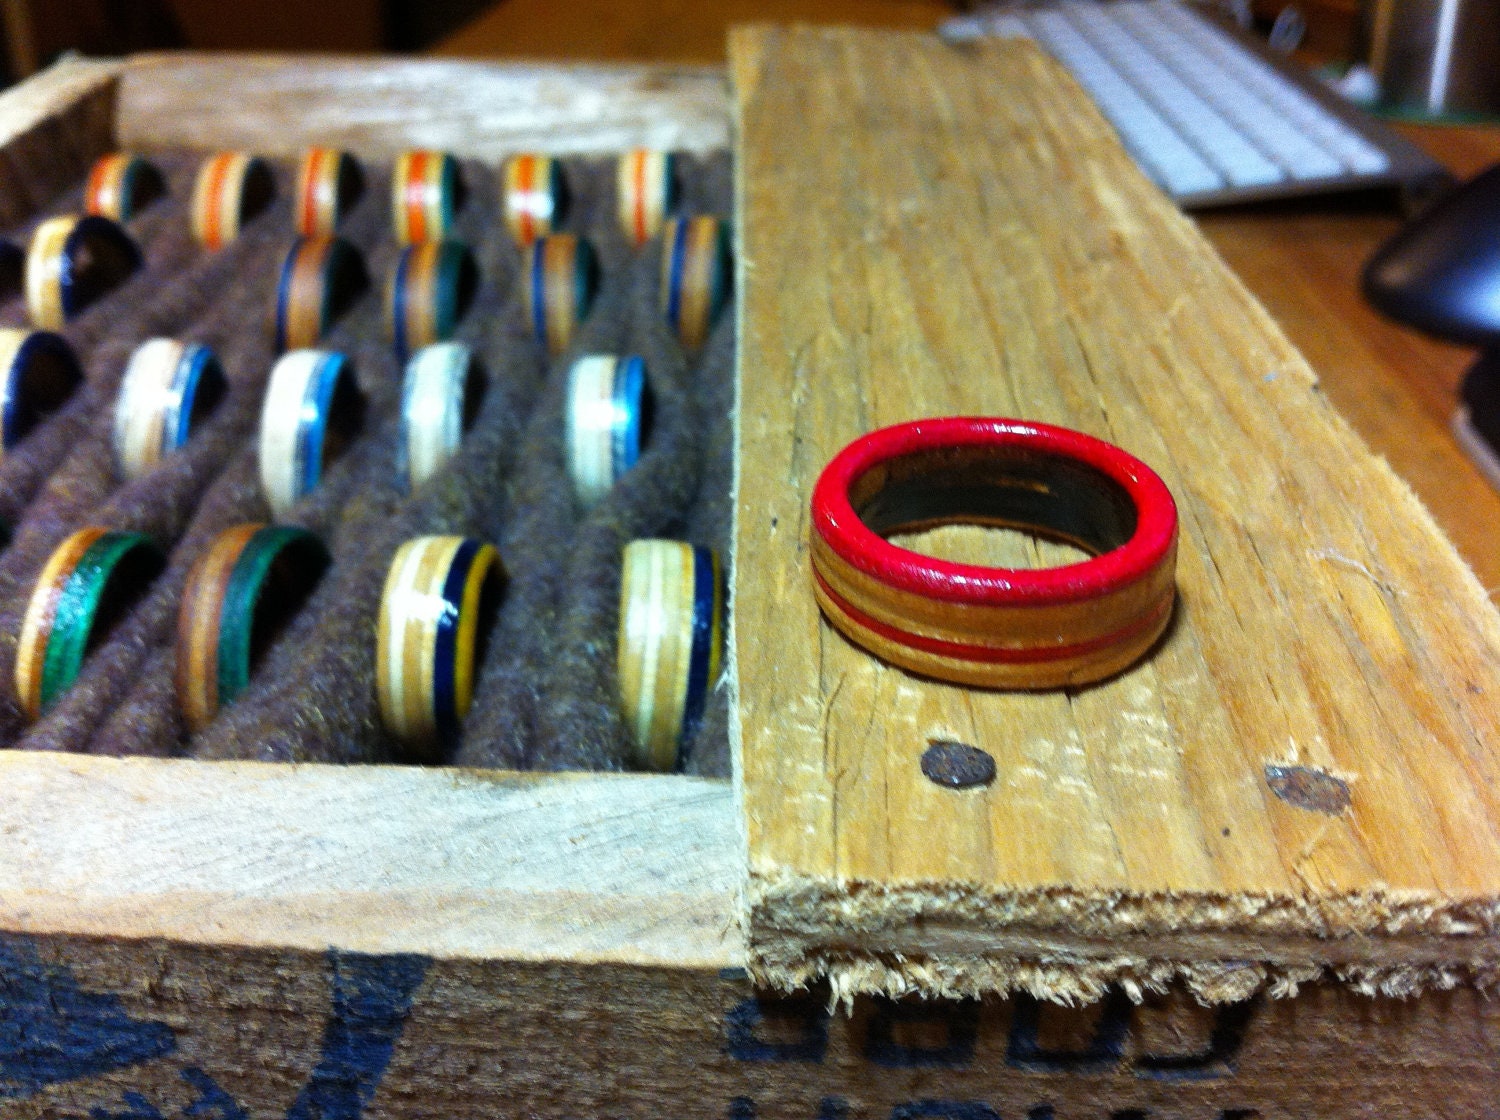 Rings with a pink stripe hand cut from skateboard decks